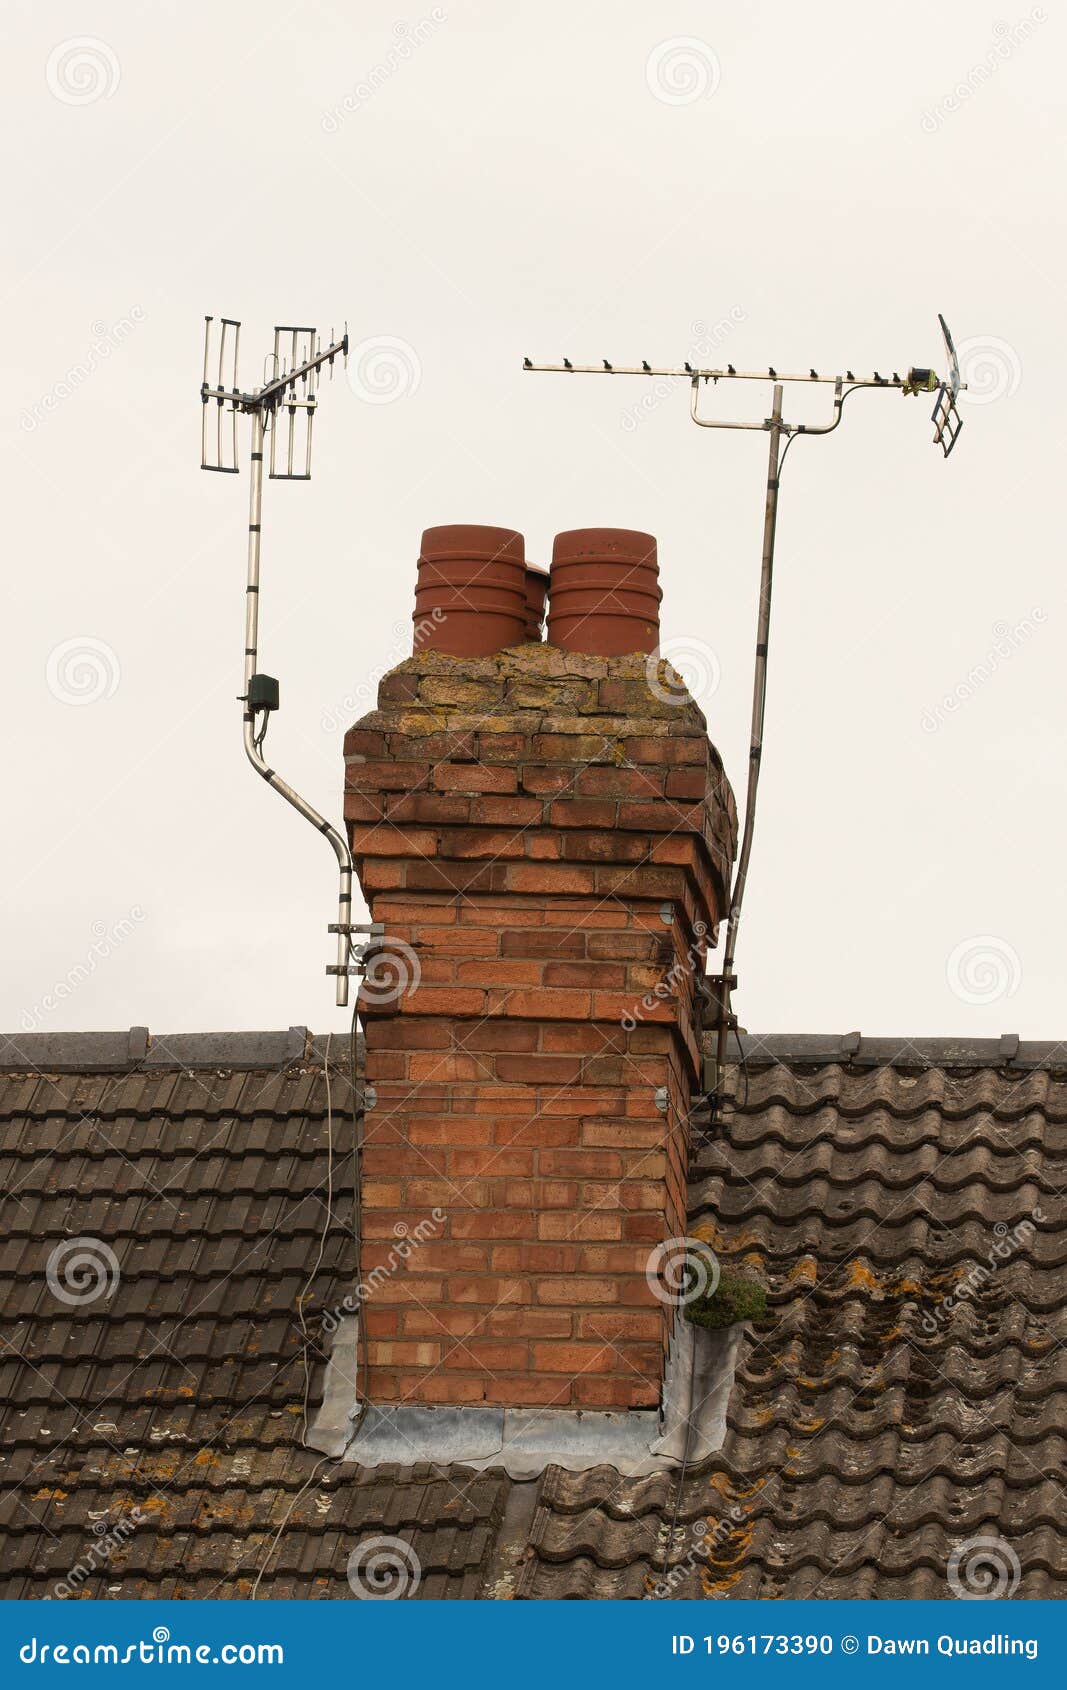 brick chimney stack and tv aerials on english rooftop